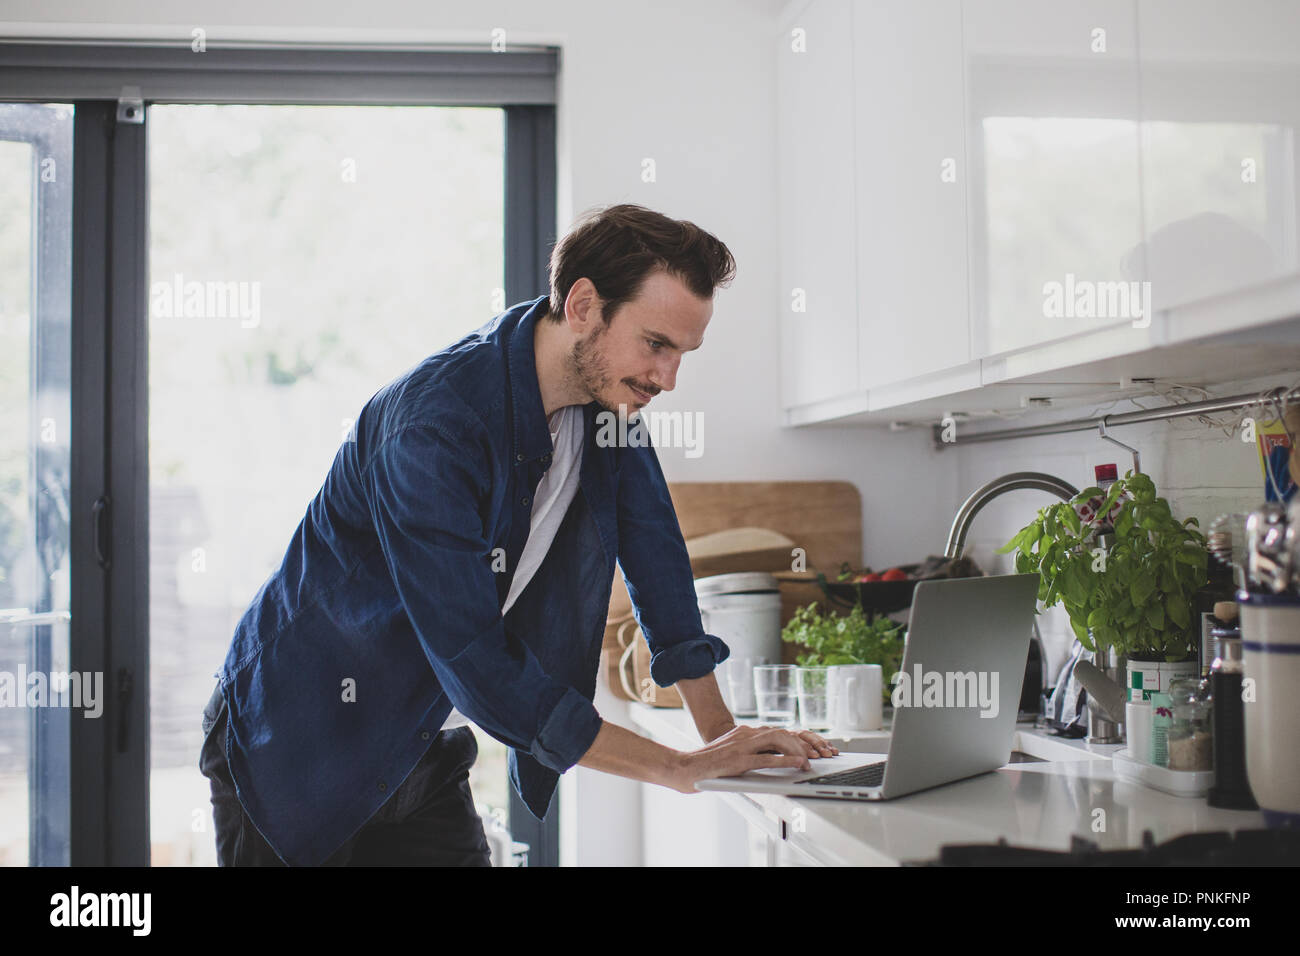 Adult male working from home in kitchen Stock Photo